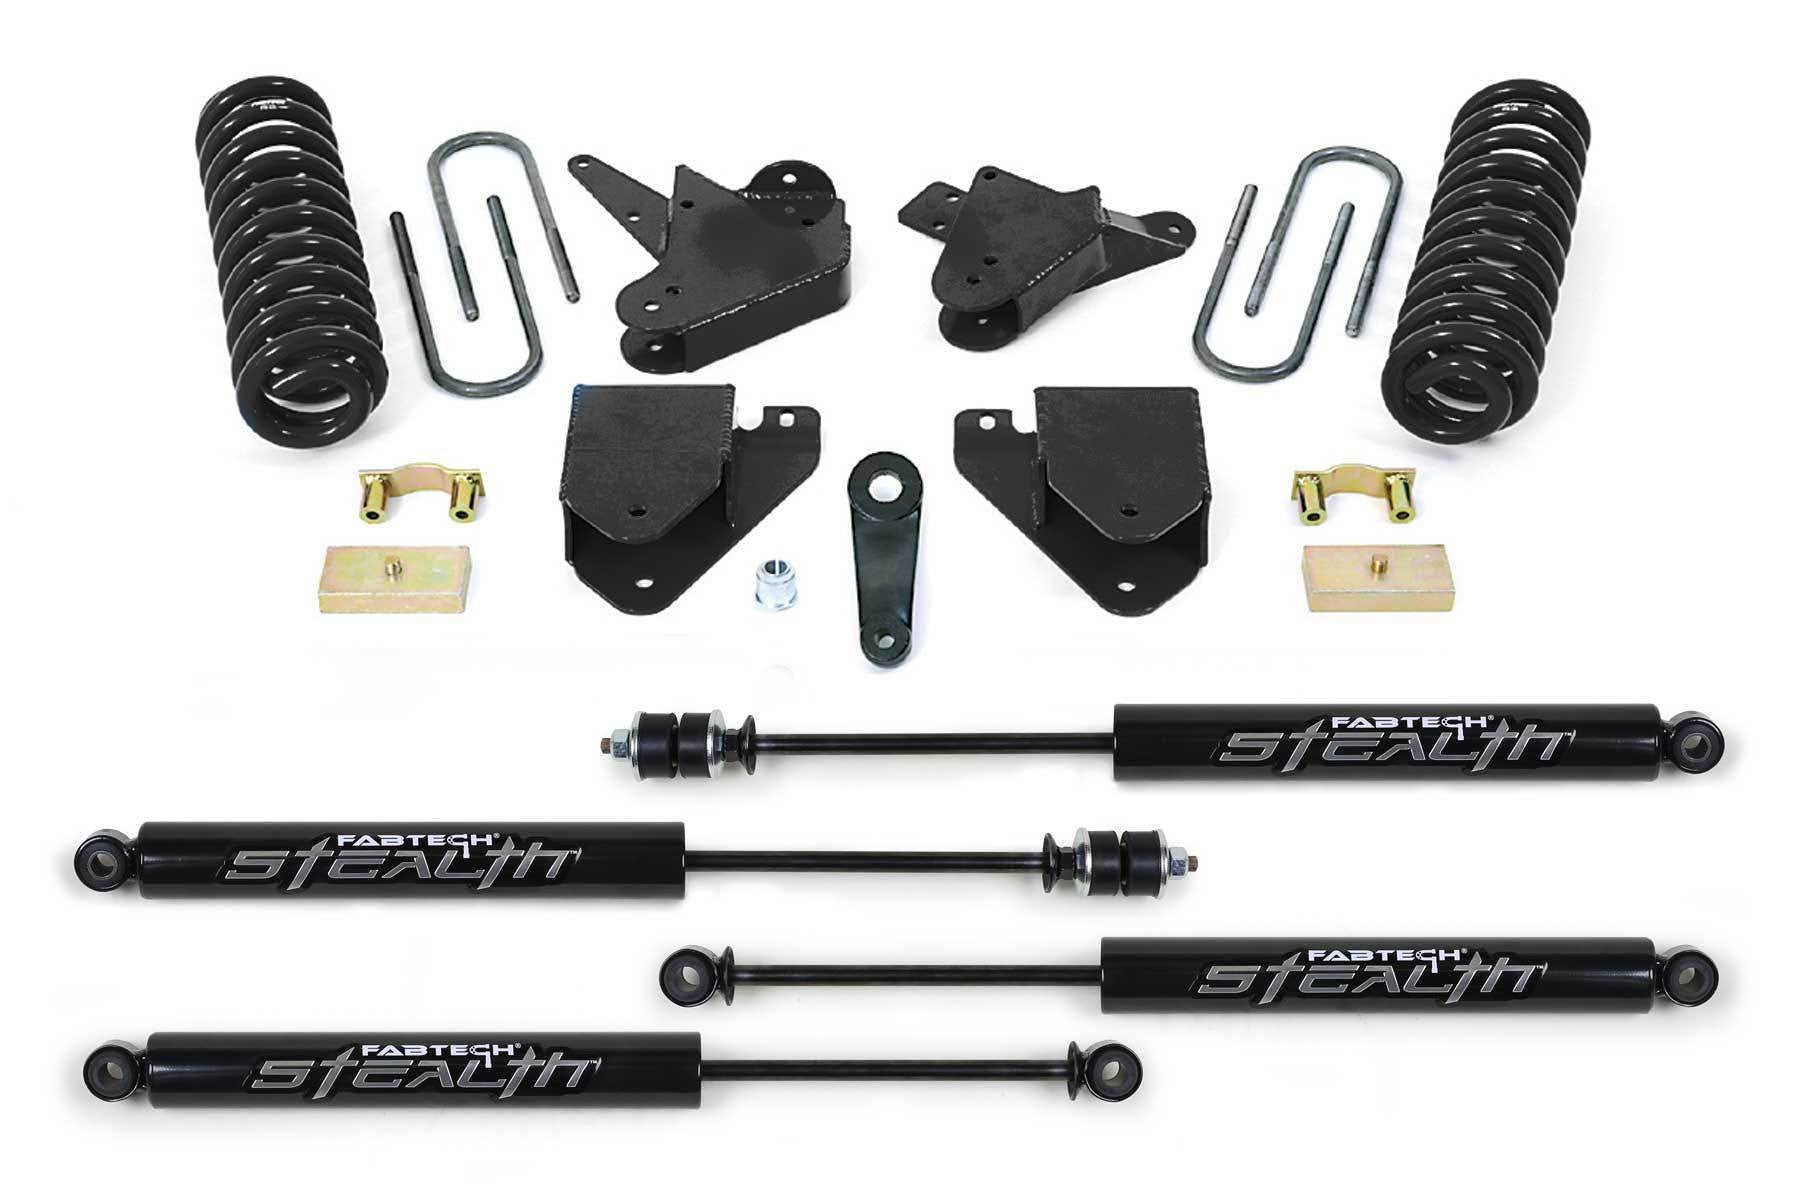 6" BASIC SYS W/STEALTH 08-10 FORD F250 2WD V10 & DIESEL - 6" BASIC SYS W/STEAL - Fabtech - Texas Complete Truck Center